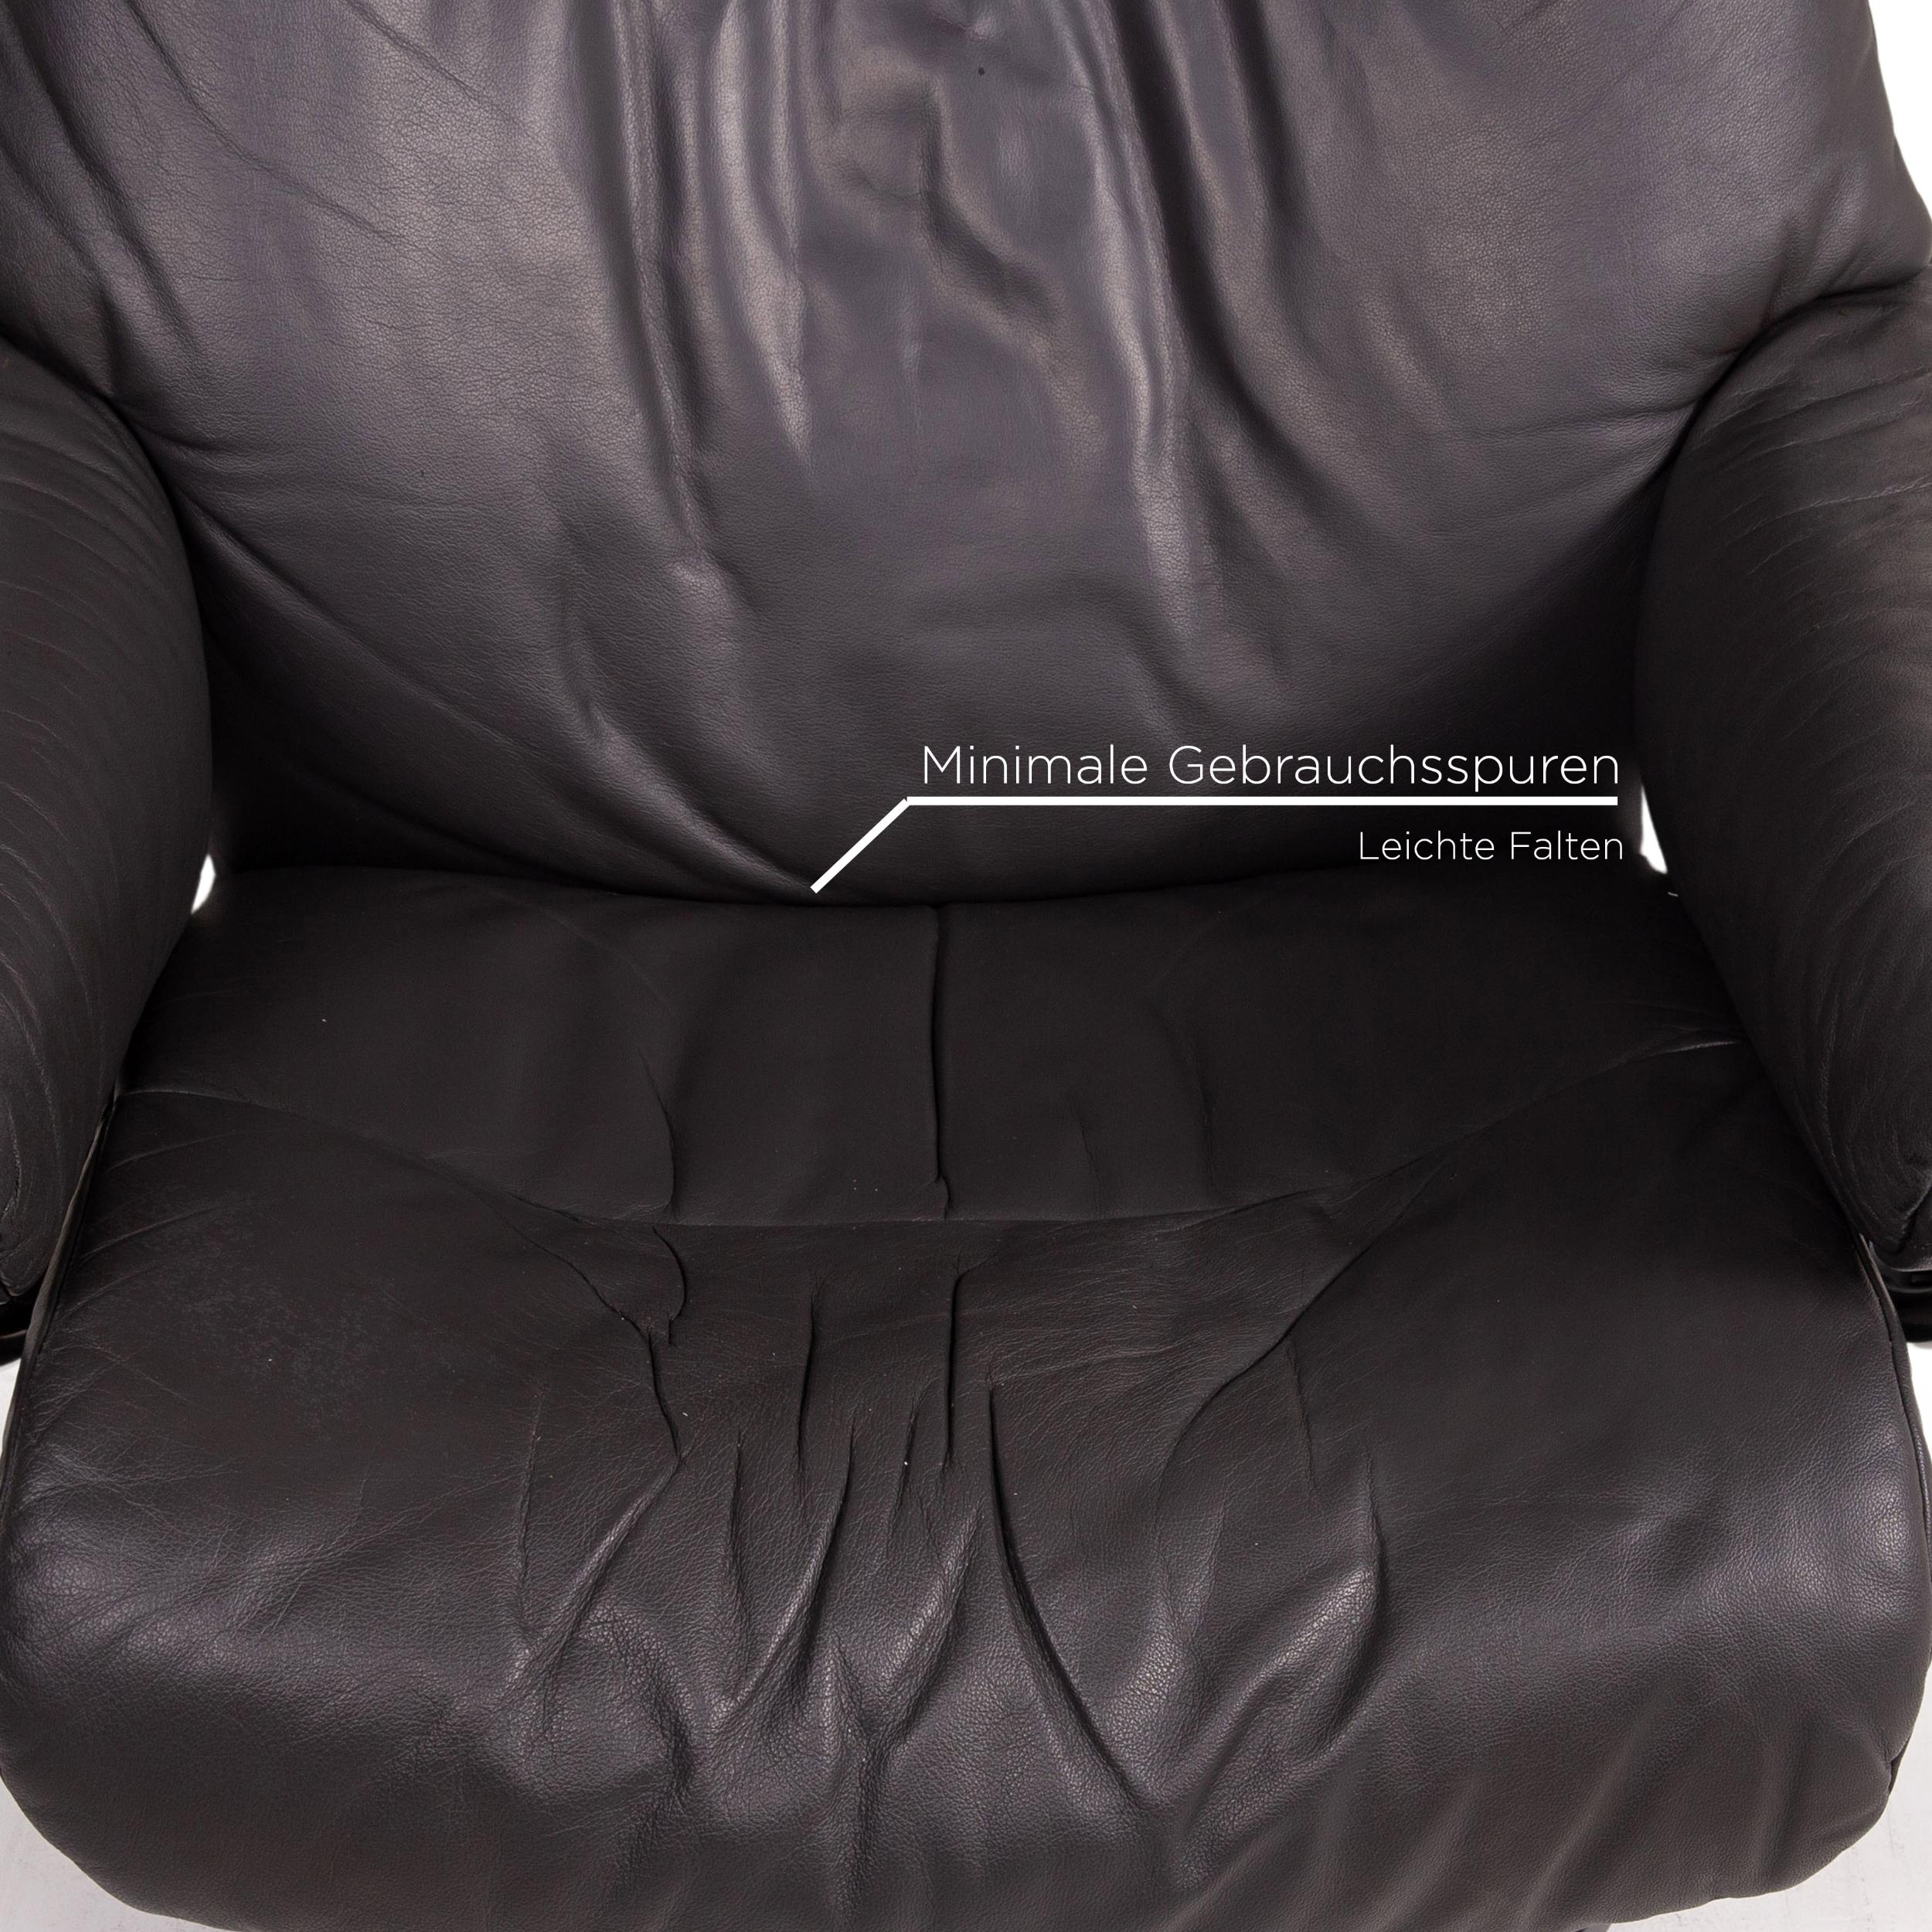 Contemporary Stressless Sunrise Leather Armchair Incl. Ottoman Gray Size M Relax Function